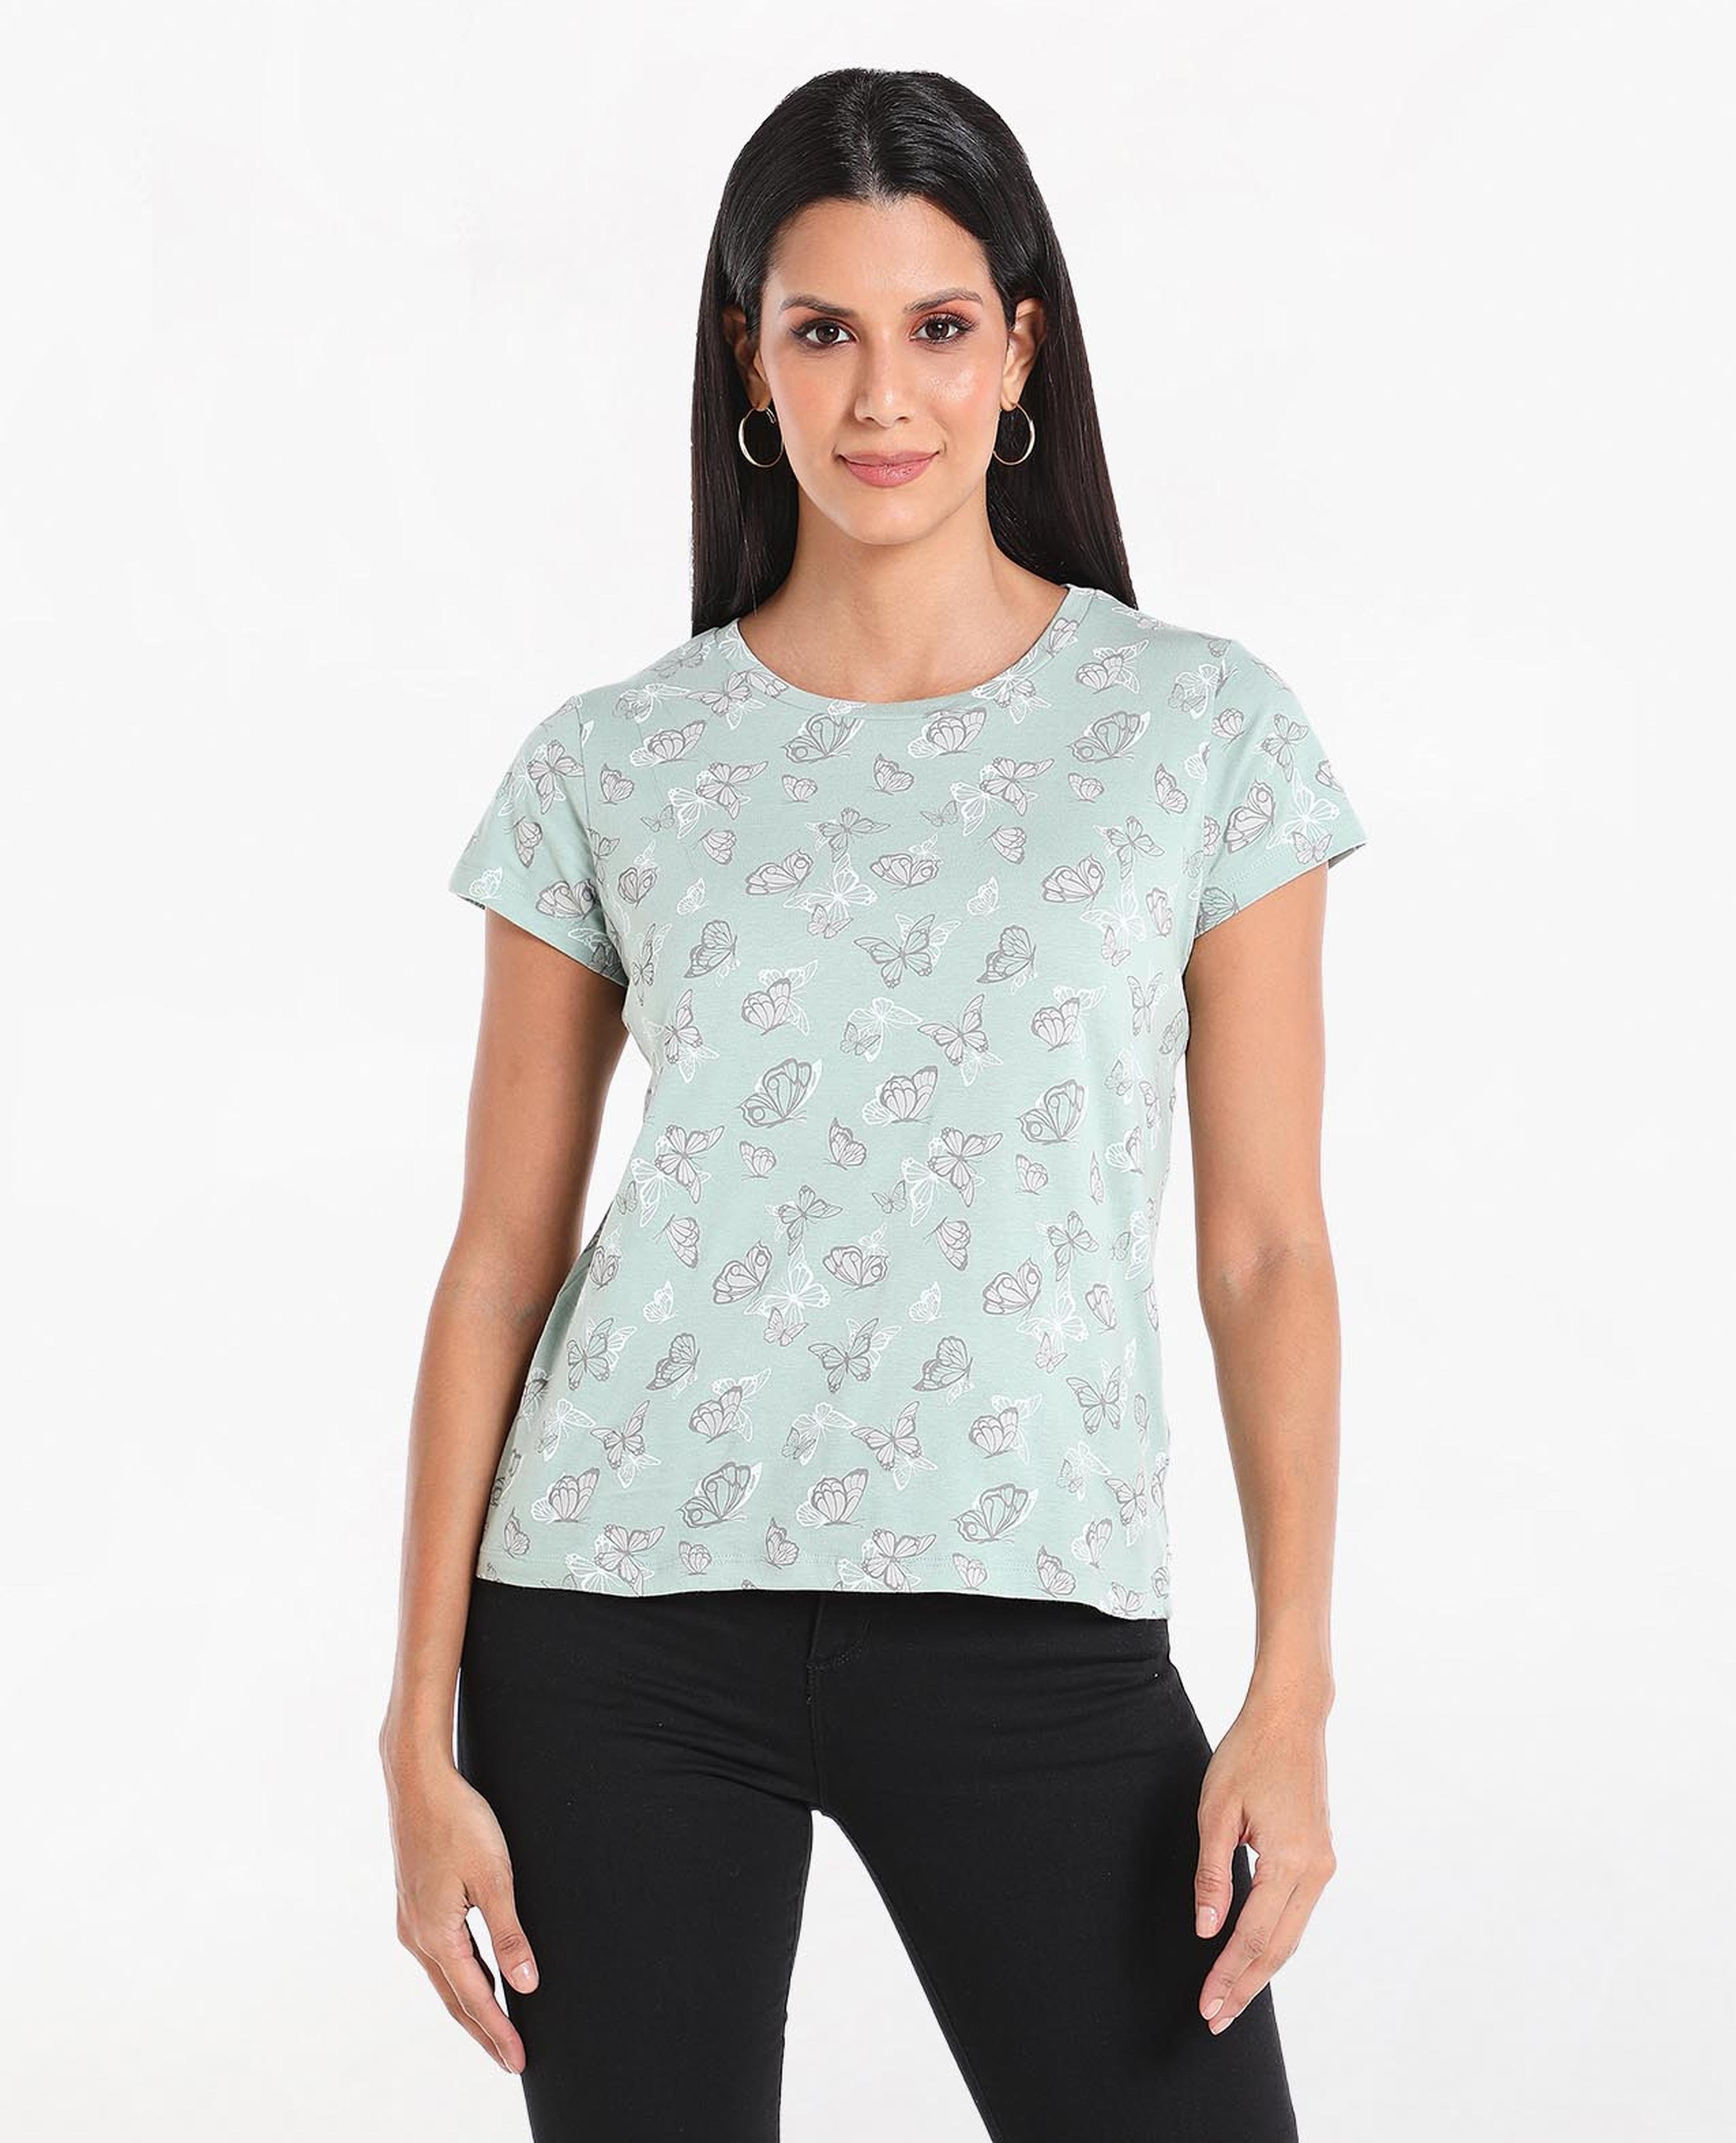 Printed T-Shirt with Round Neck and Short Sleeves